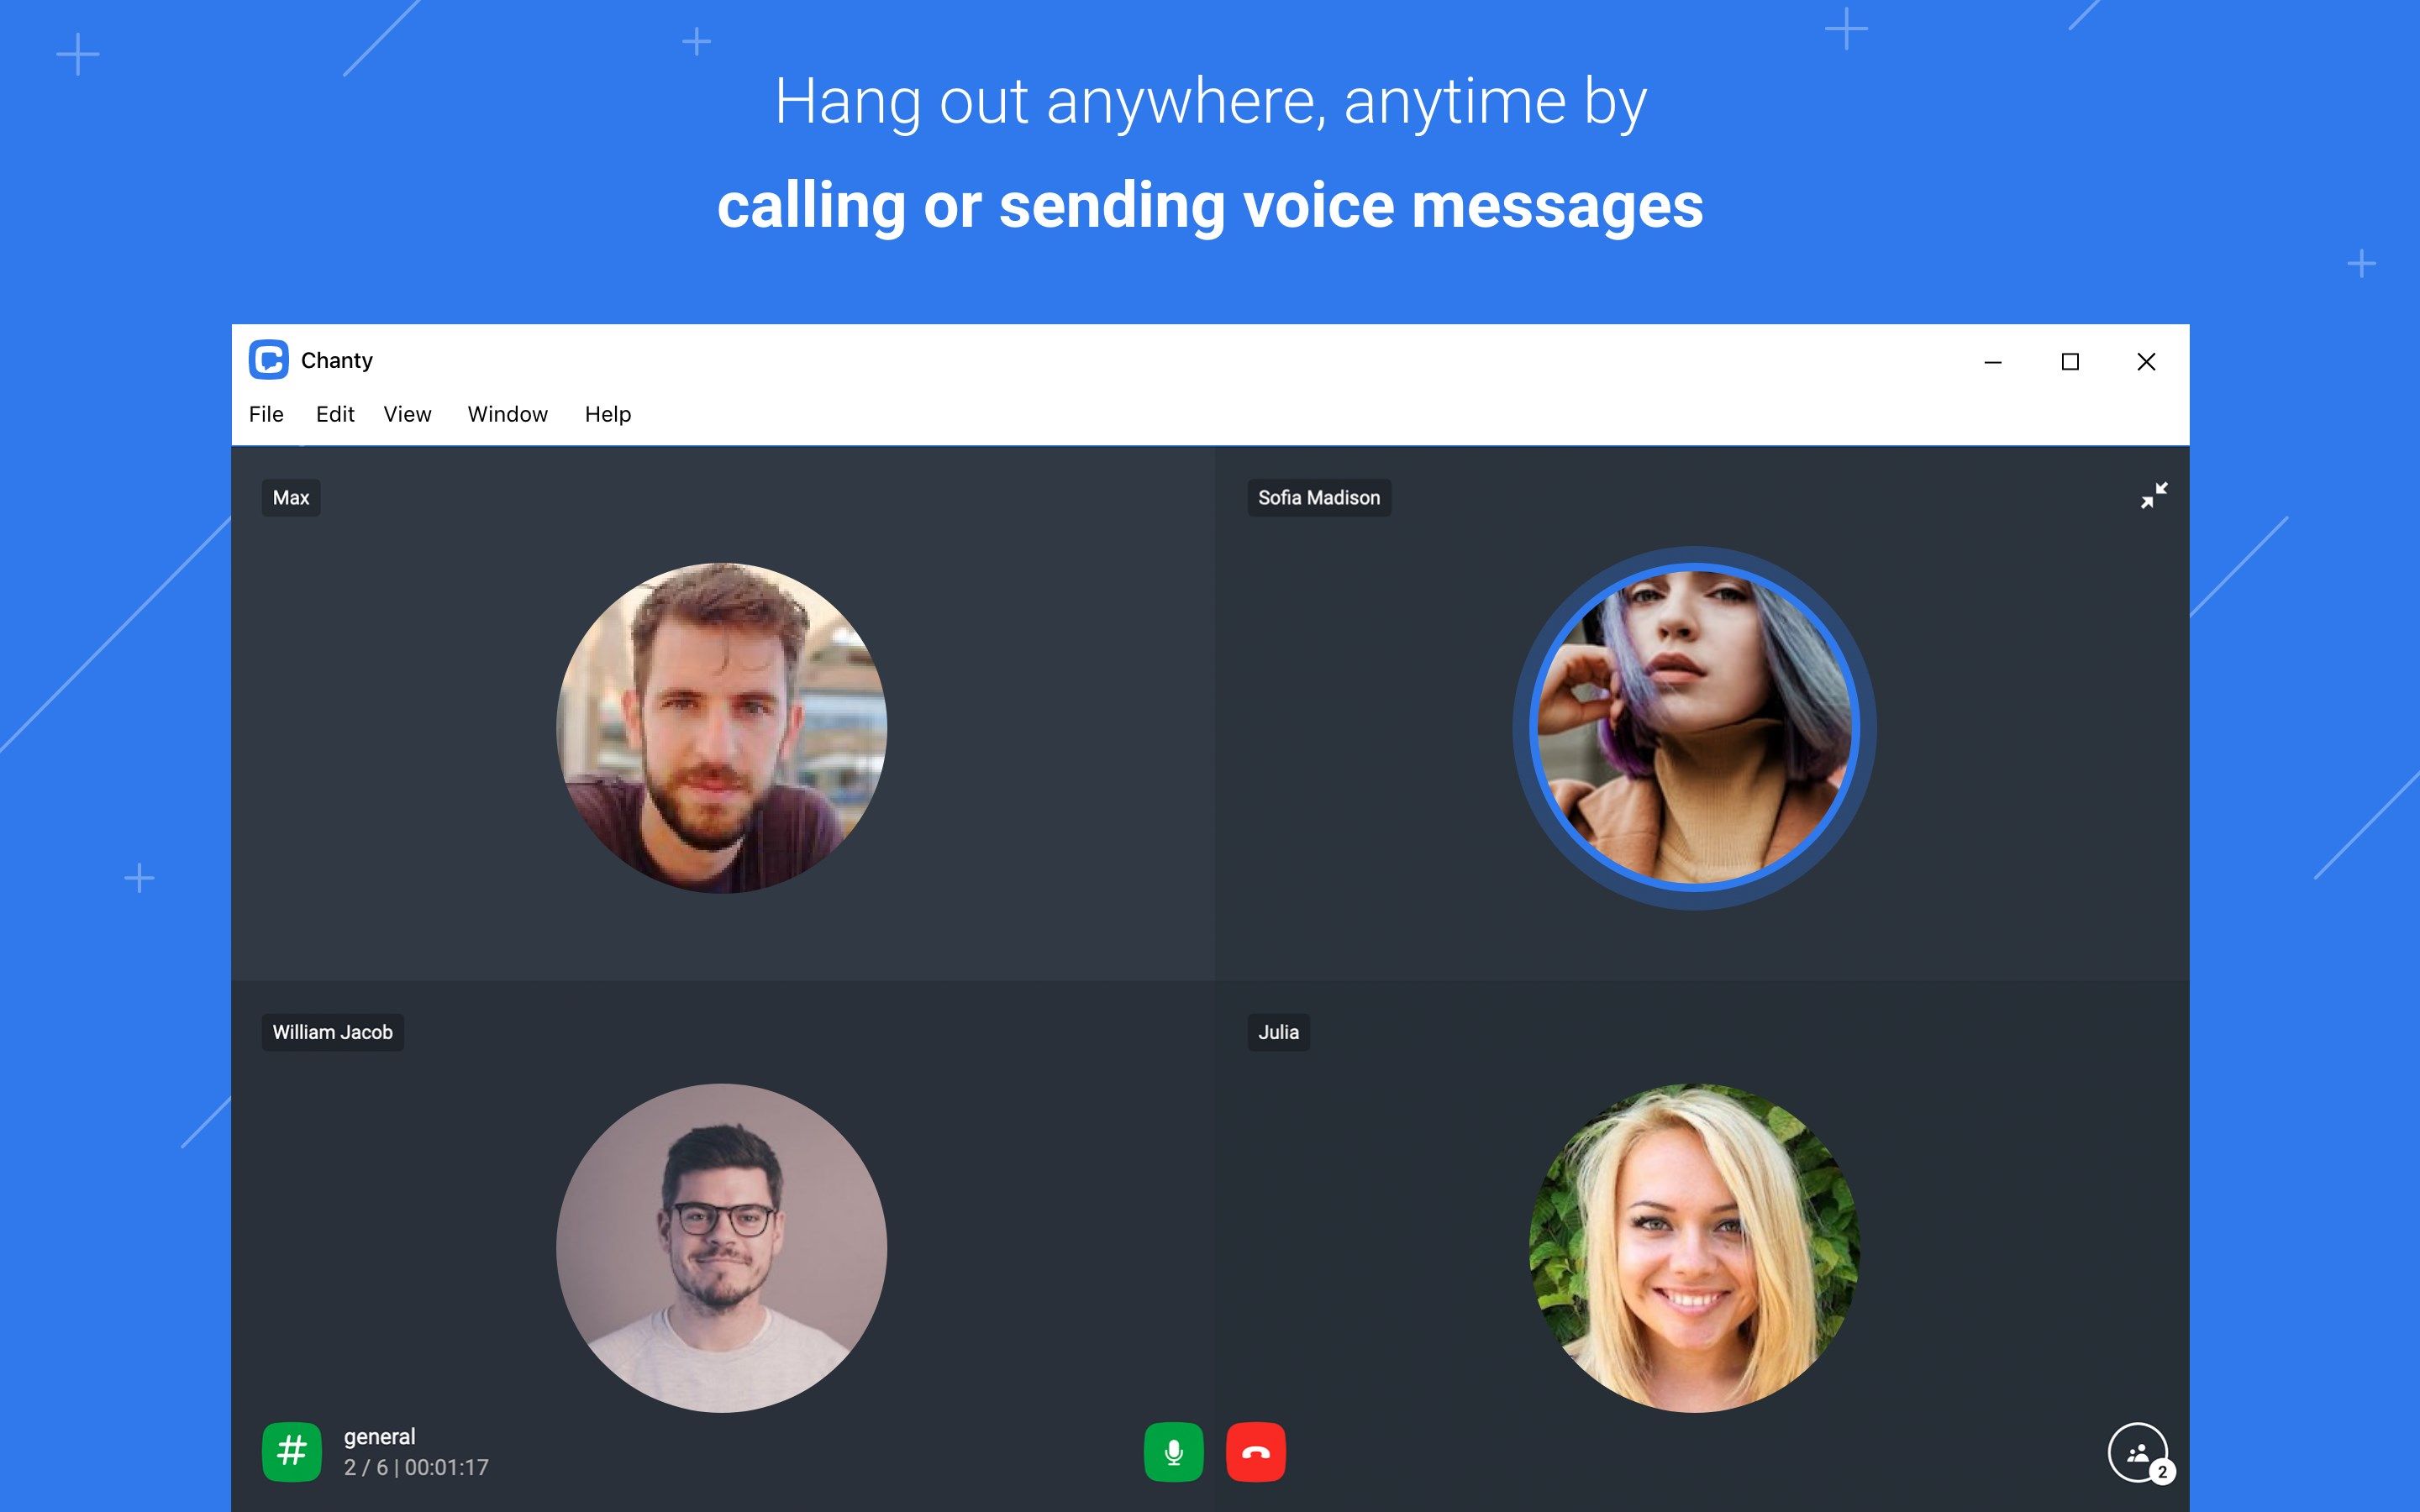 Hang out anywhere, anytime by calling or sending voice messages